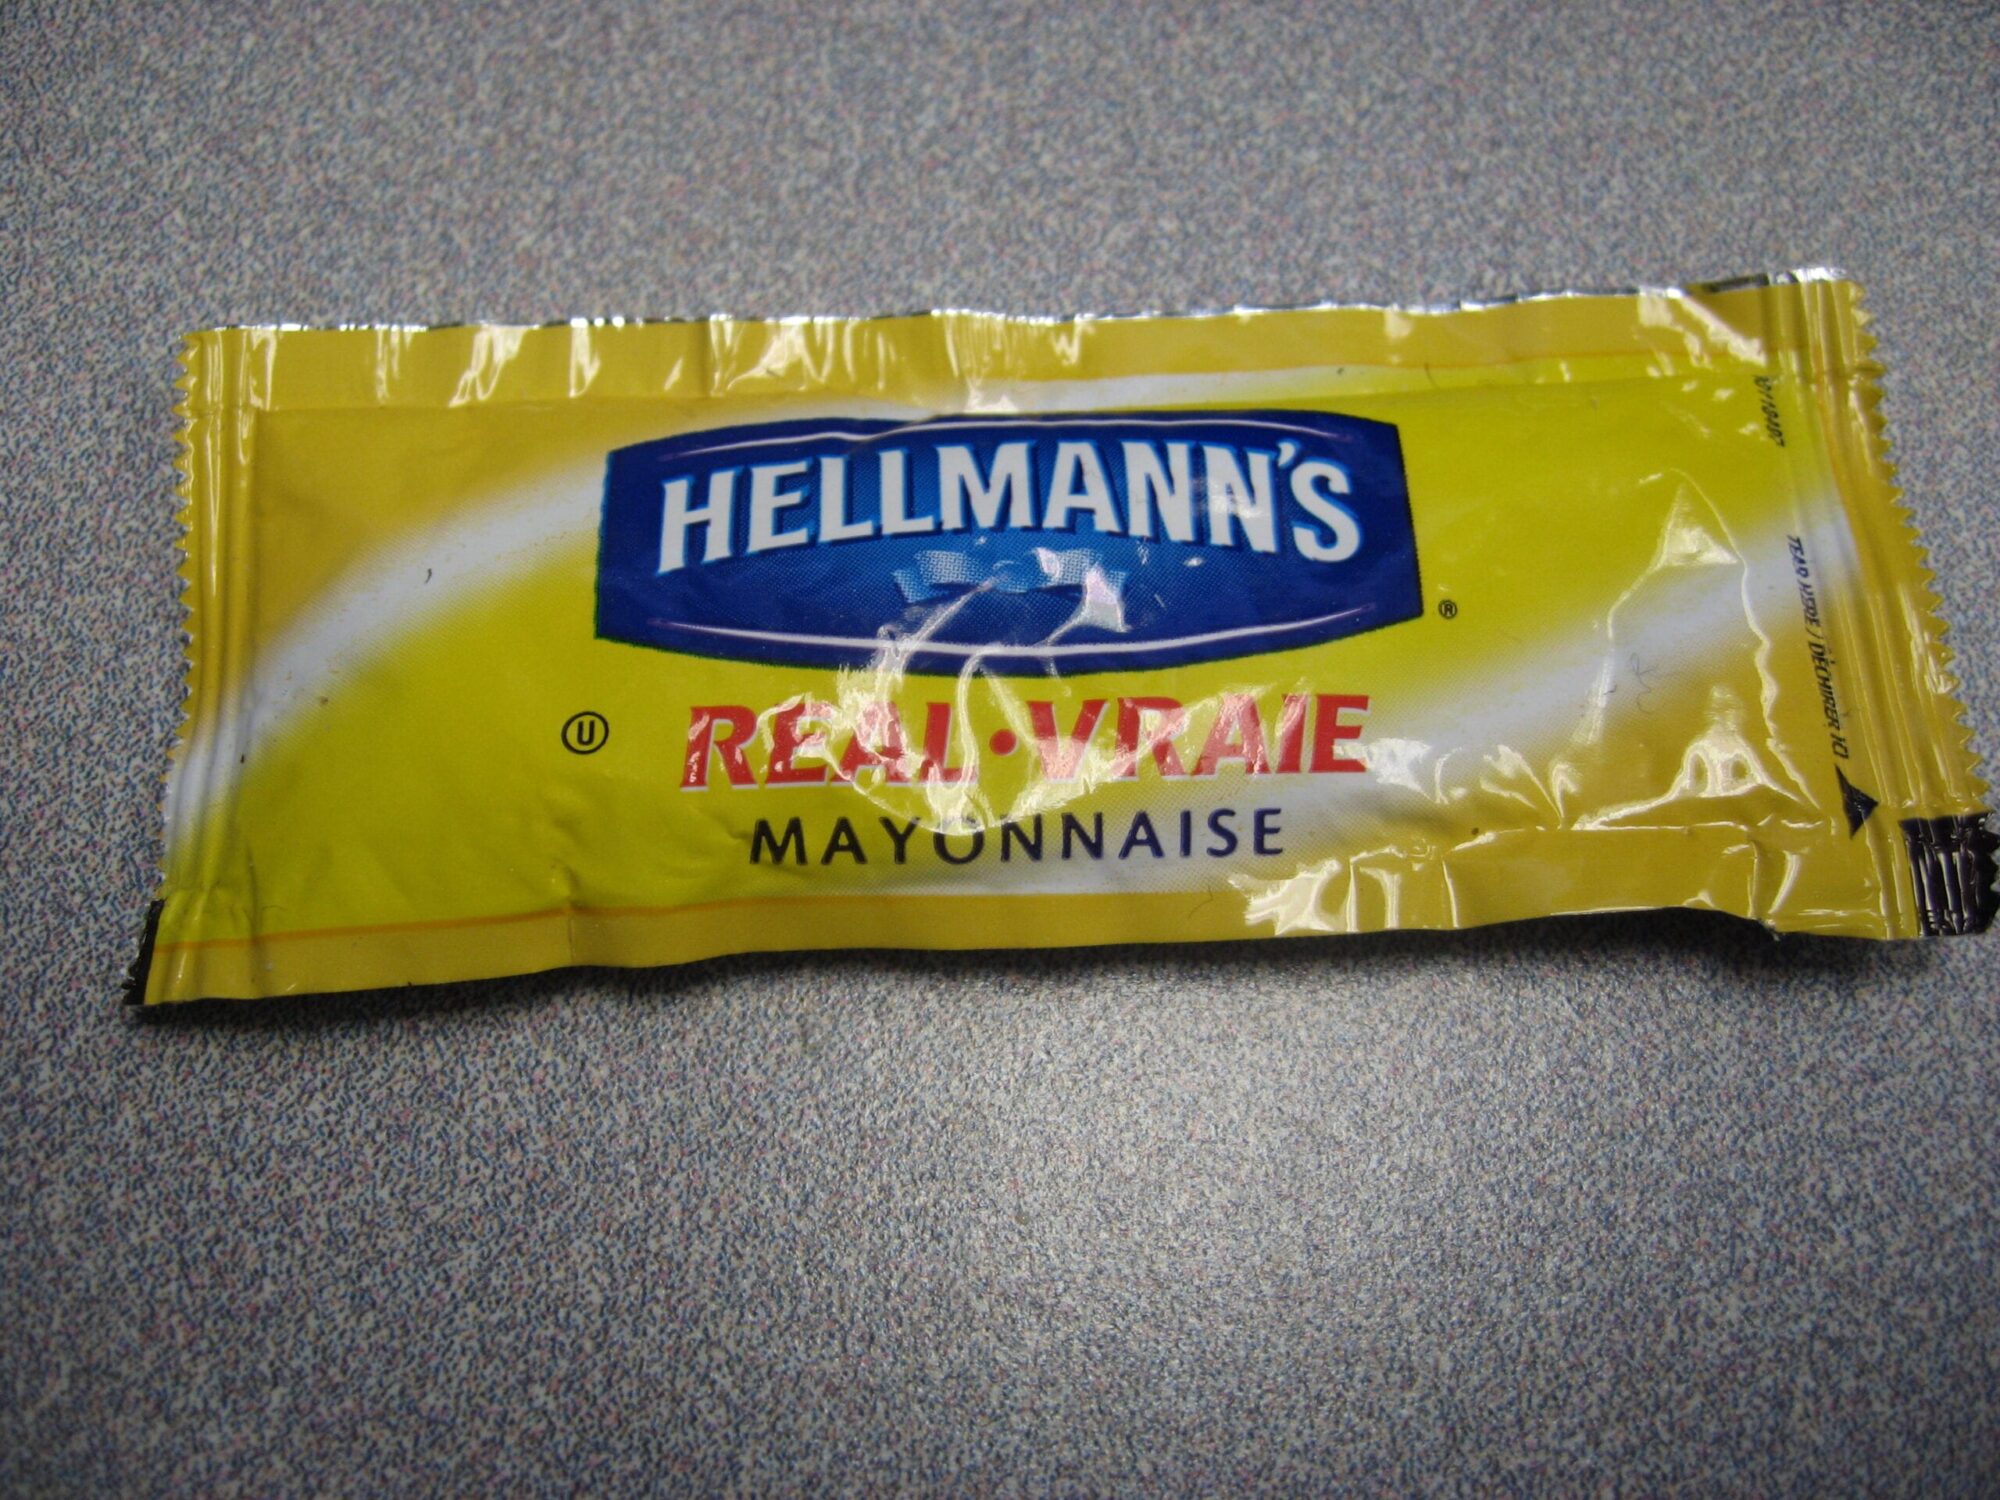 Hold the mayo – in your purse